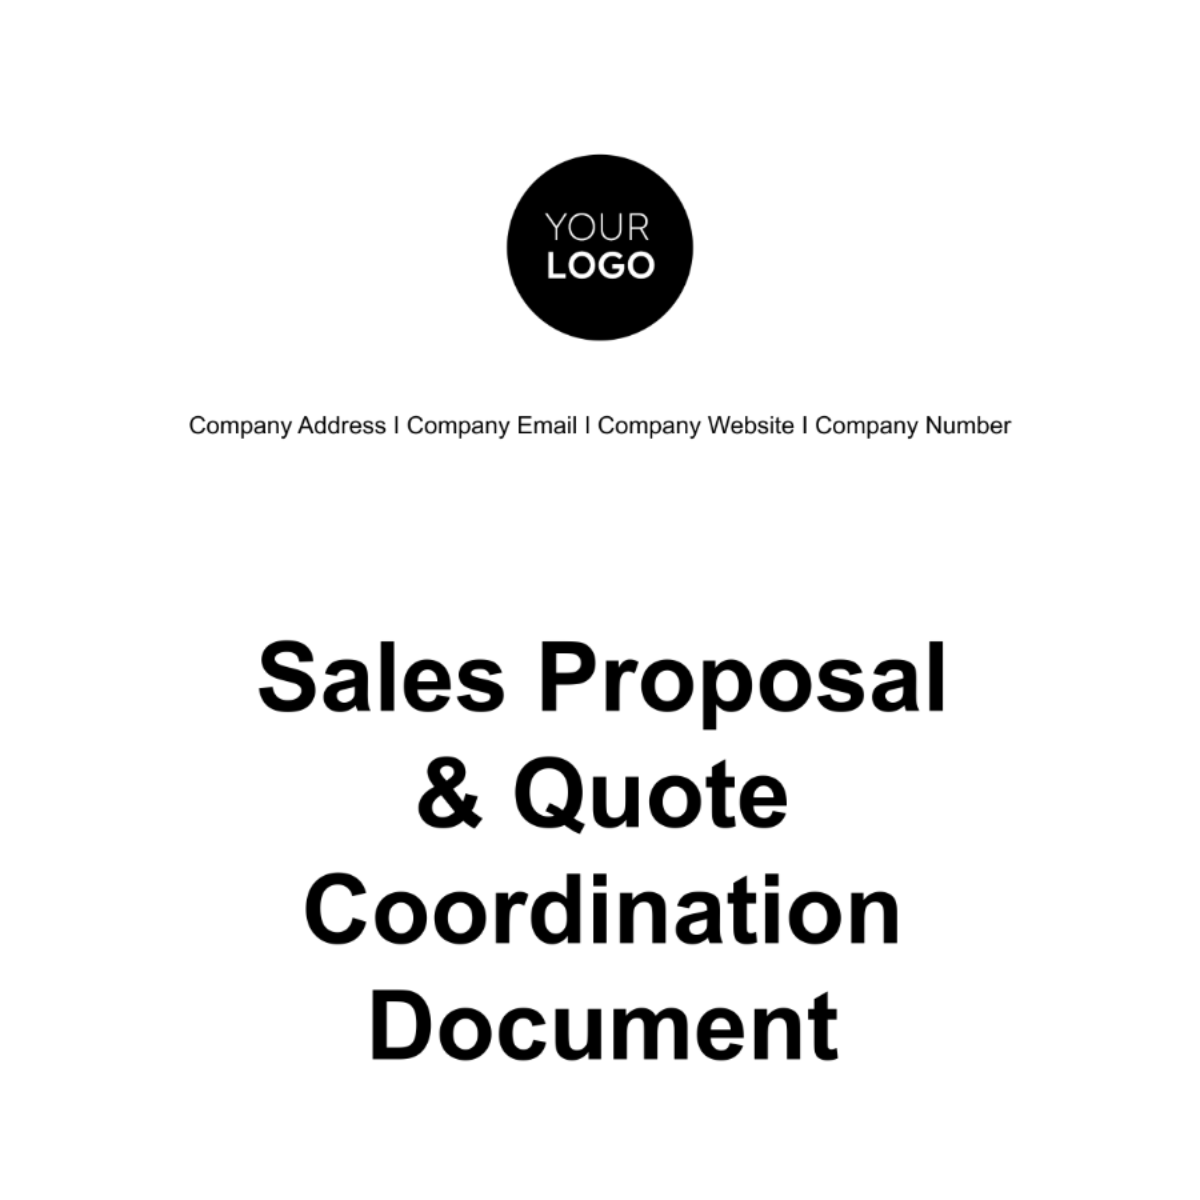 Free Sales Proposal & Quote Coordination Document Template